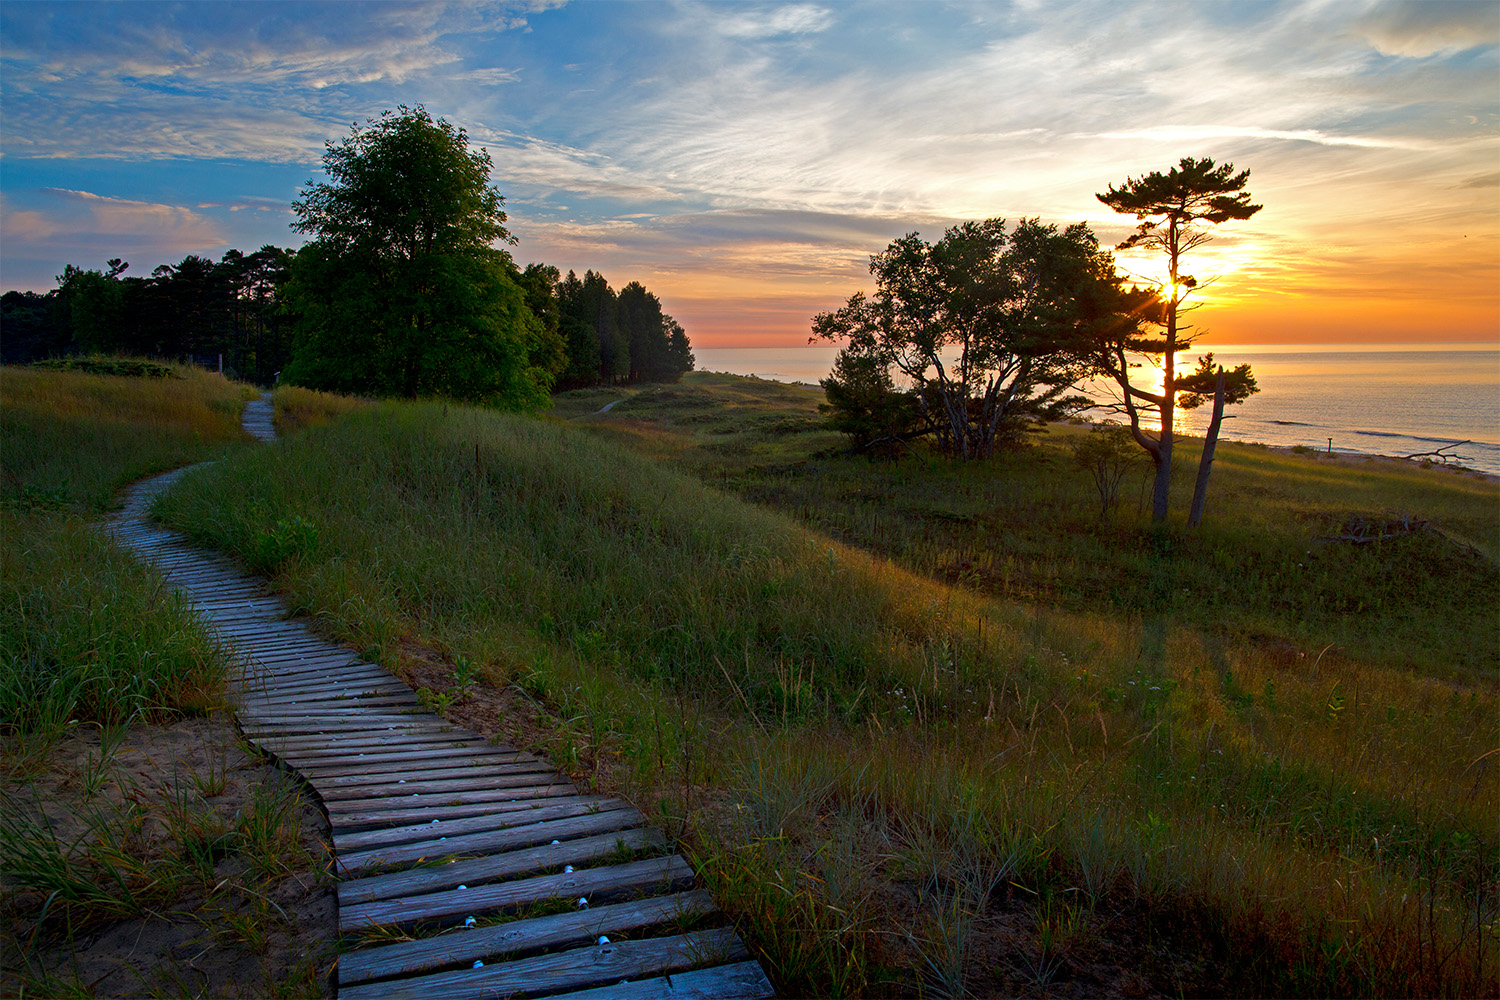 Boardwalk in Kohler-Andrae State Park in Sheboygan, Wisconsin offers camping and 2.5 miles of sandy beach.